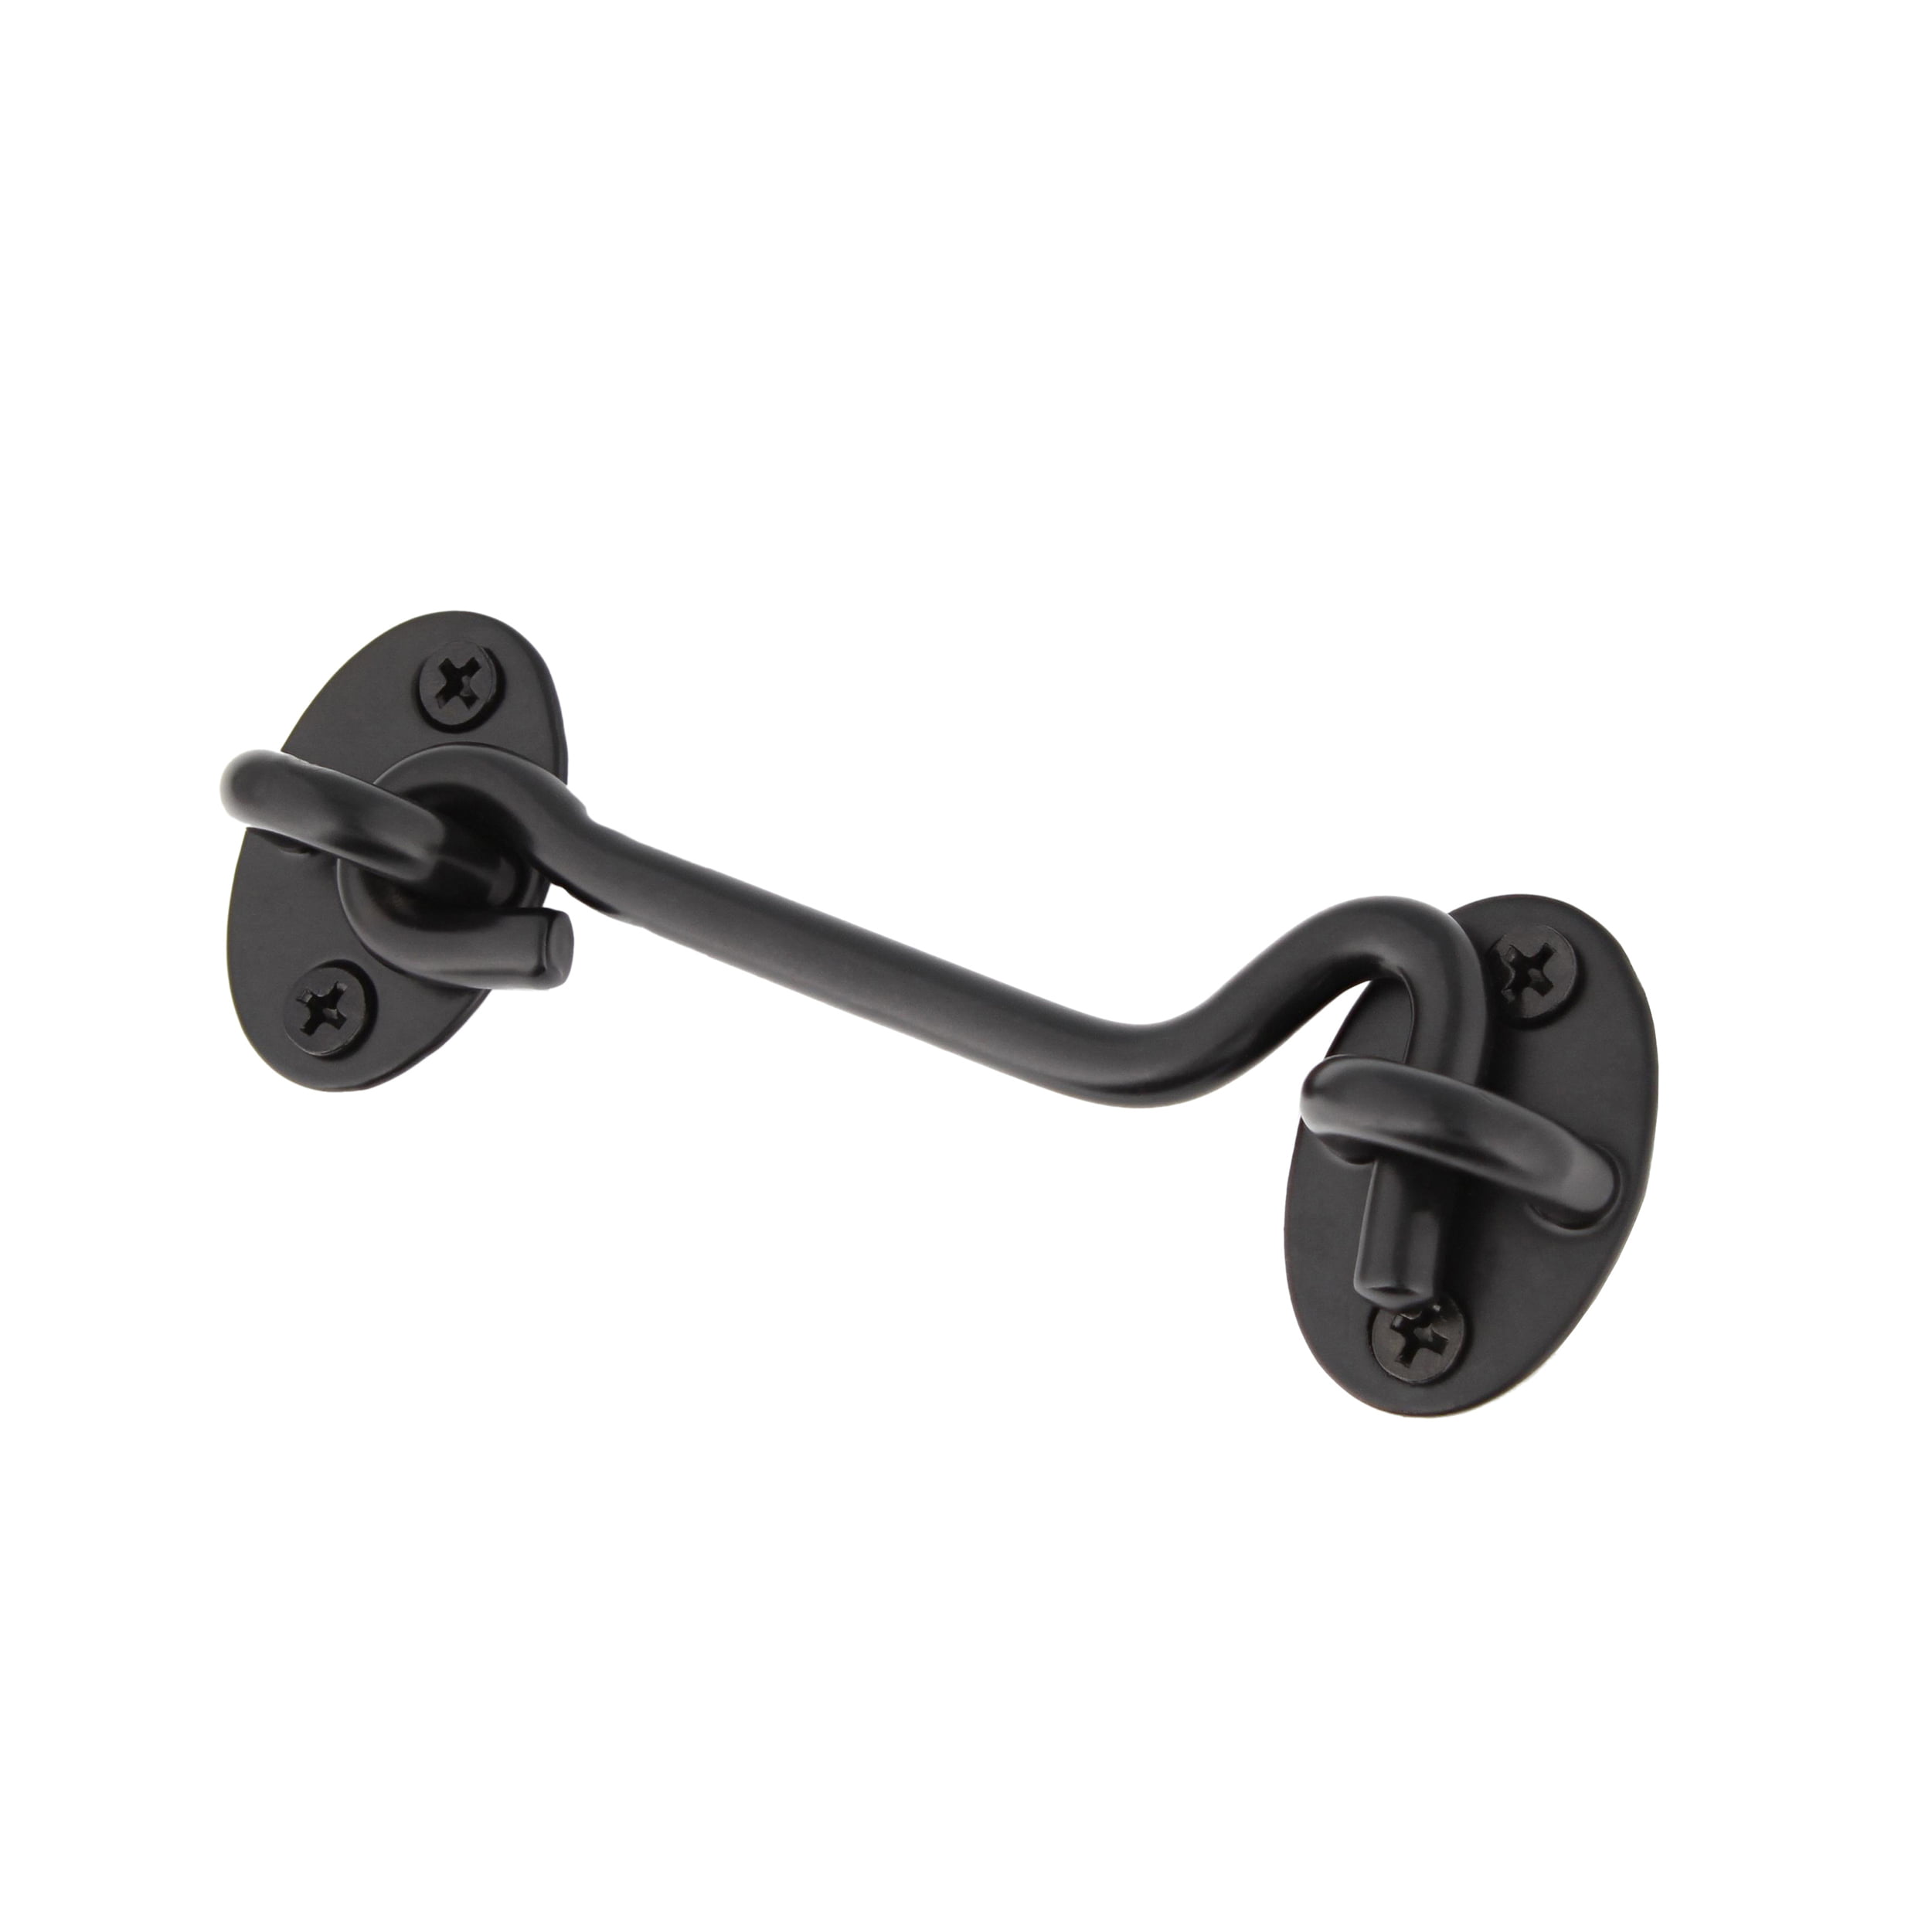 Rural365 Dual Pack Black Metal 4in Privacy Hook and Eye Latch for Front Doors, Sheds, Gates, Drawers, and Barns 803001